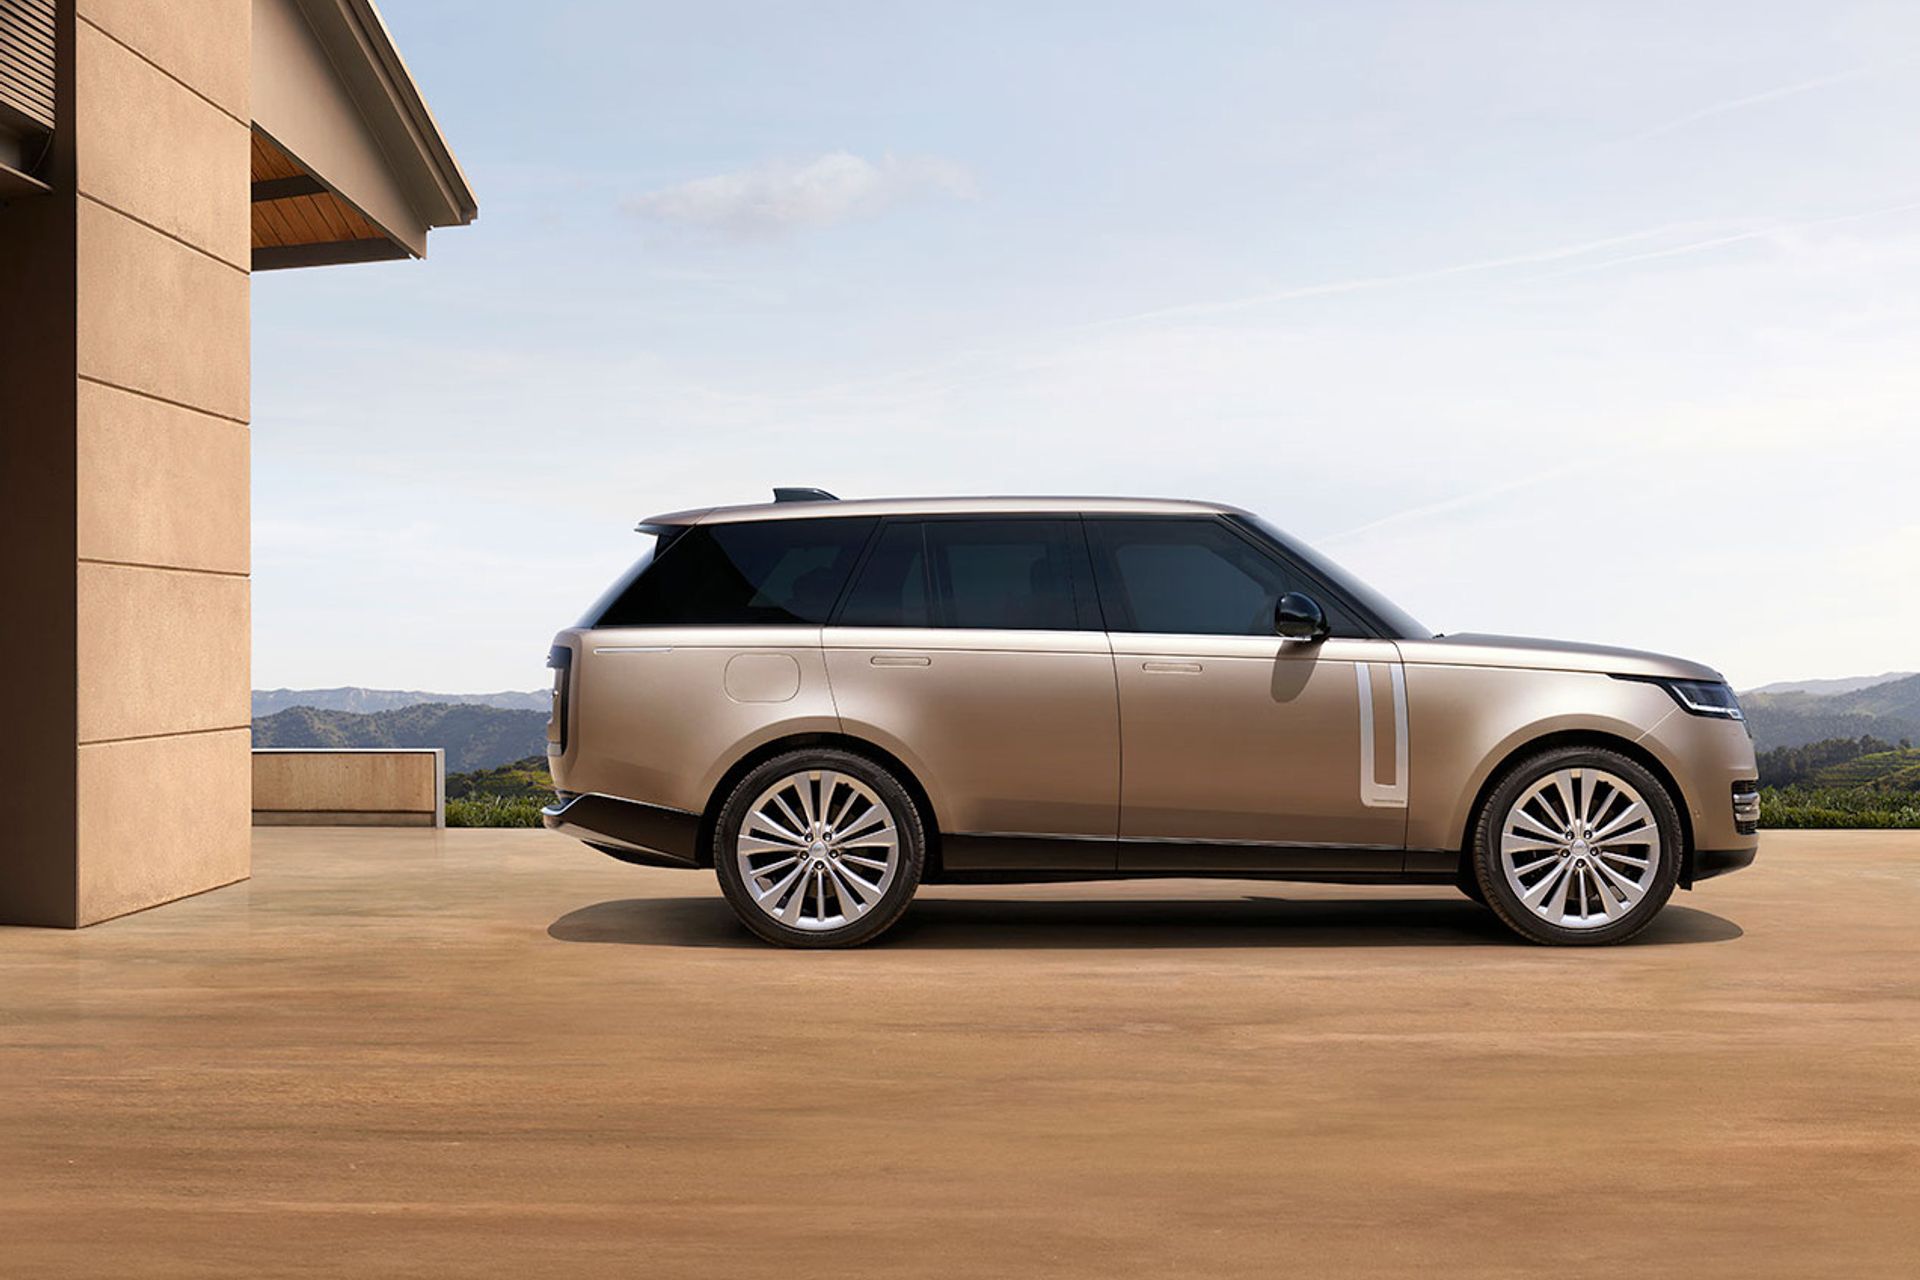 The all-new fifth generation Range Rover is finally here